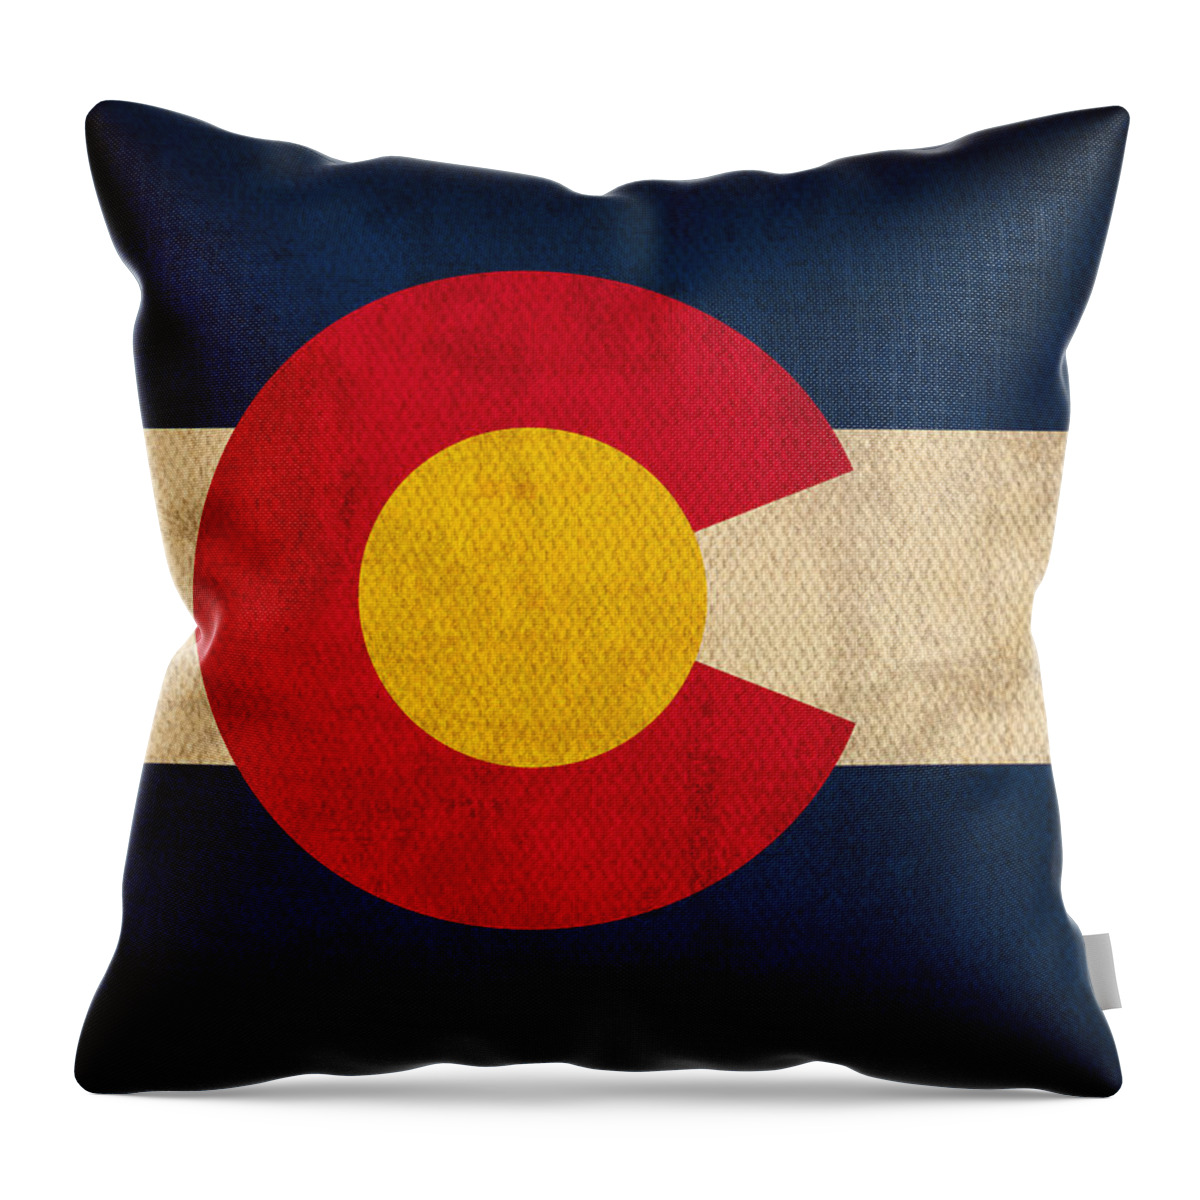 Colorado State Flag Art On Worn Canvas Throw Pillow featuring the mixed media Colorado State Flag Art on Worn Canvas by Design Turnpike